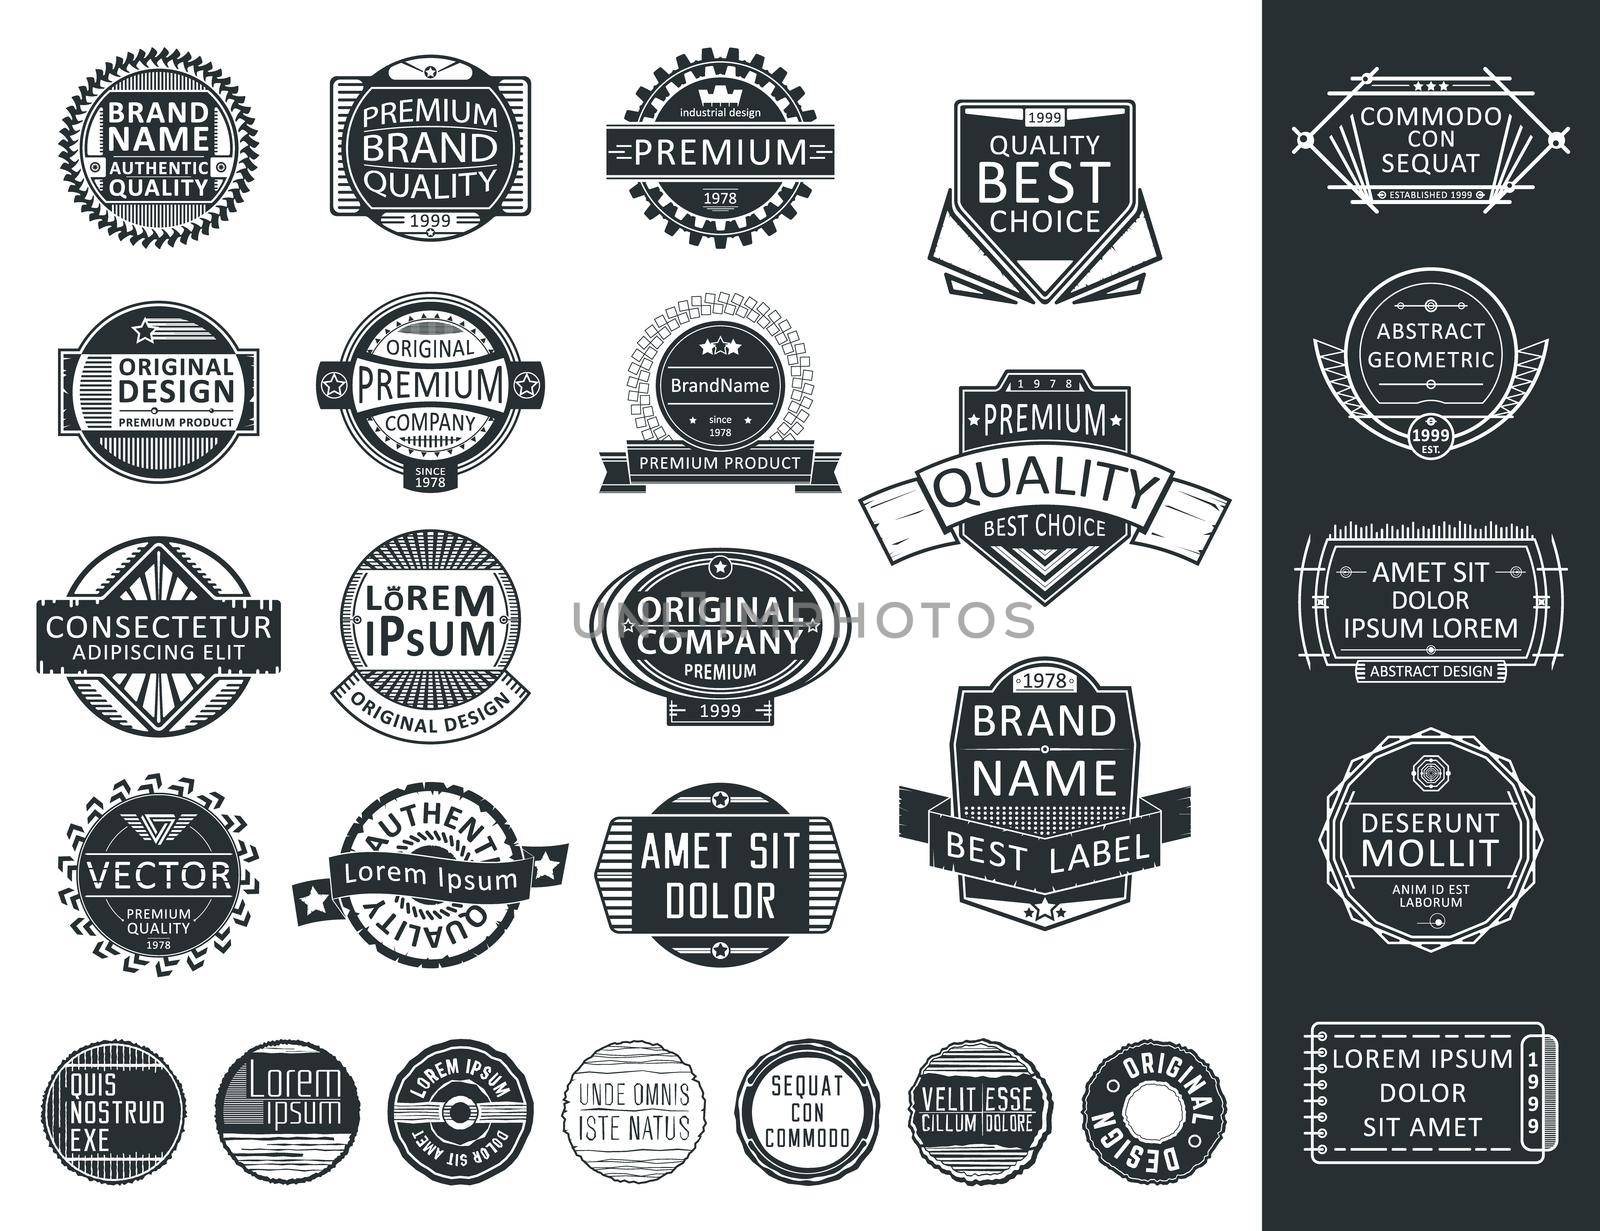 Insignias, Logotypes, Stamps Set. Retro Vintage design. Vector elements for corporate identity, labels, badges and objects.